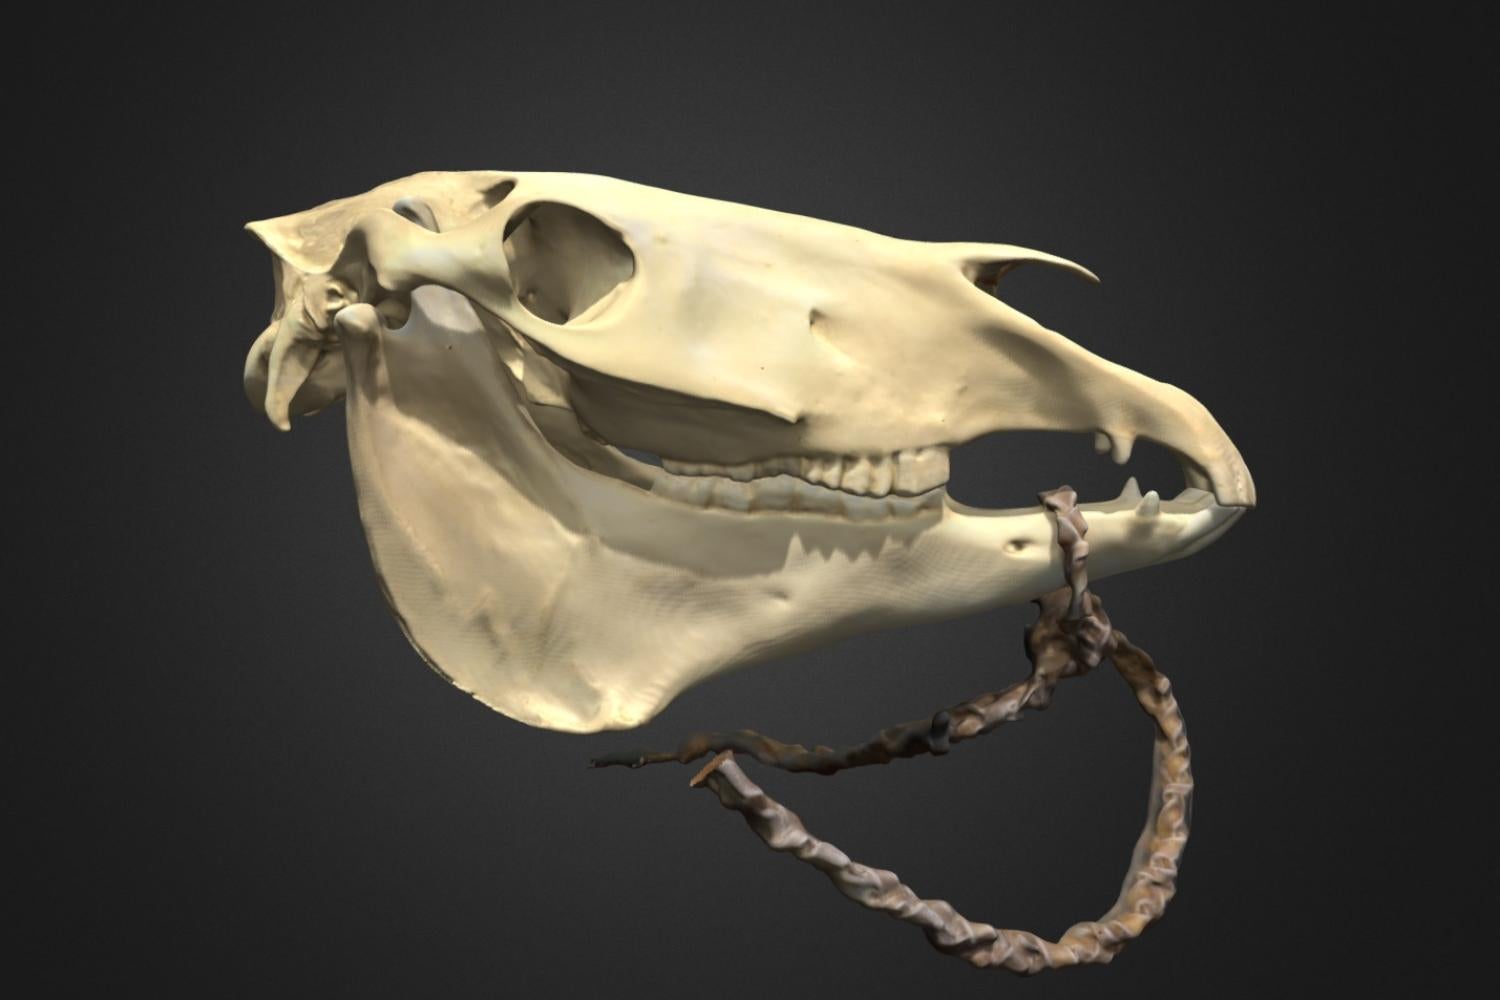 3D scan of horse skull with bridle hanging from mouth